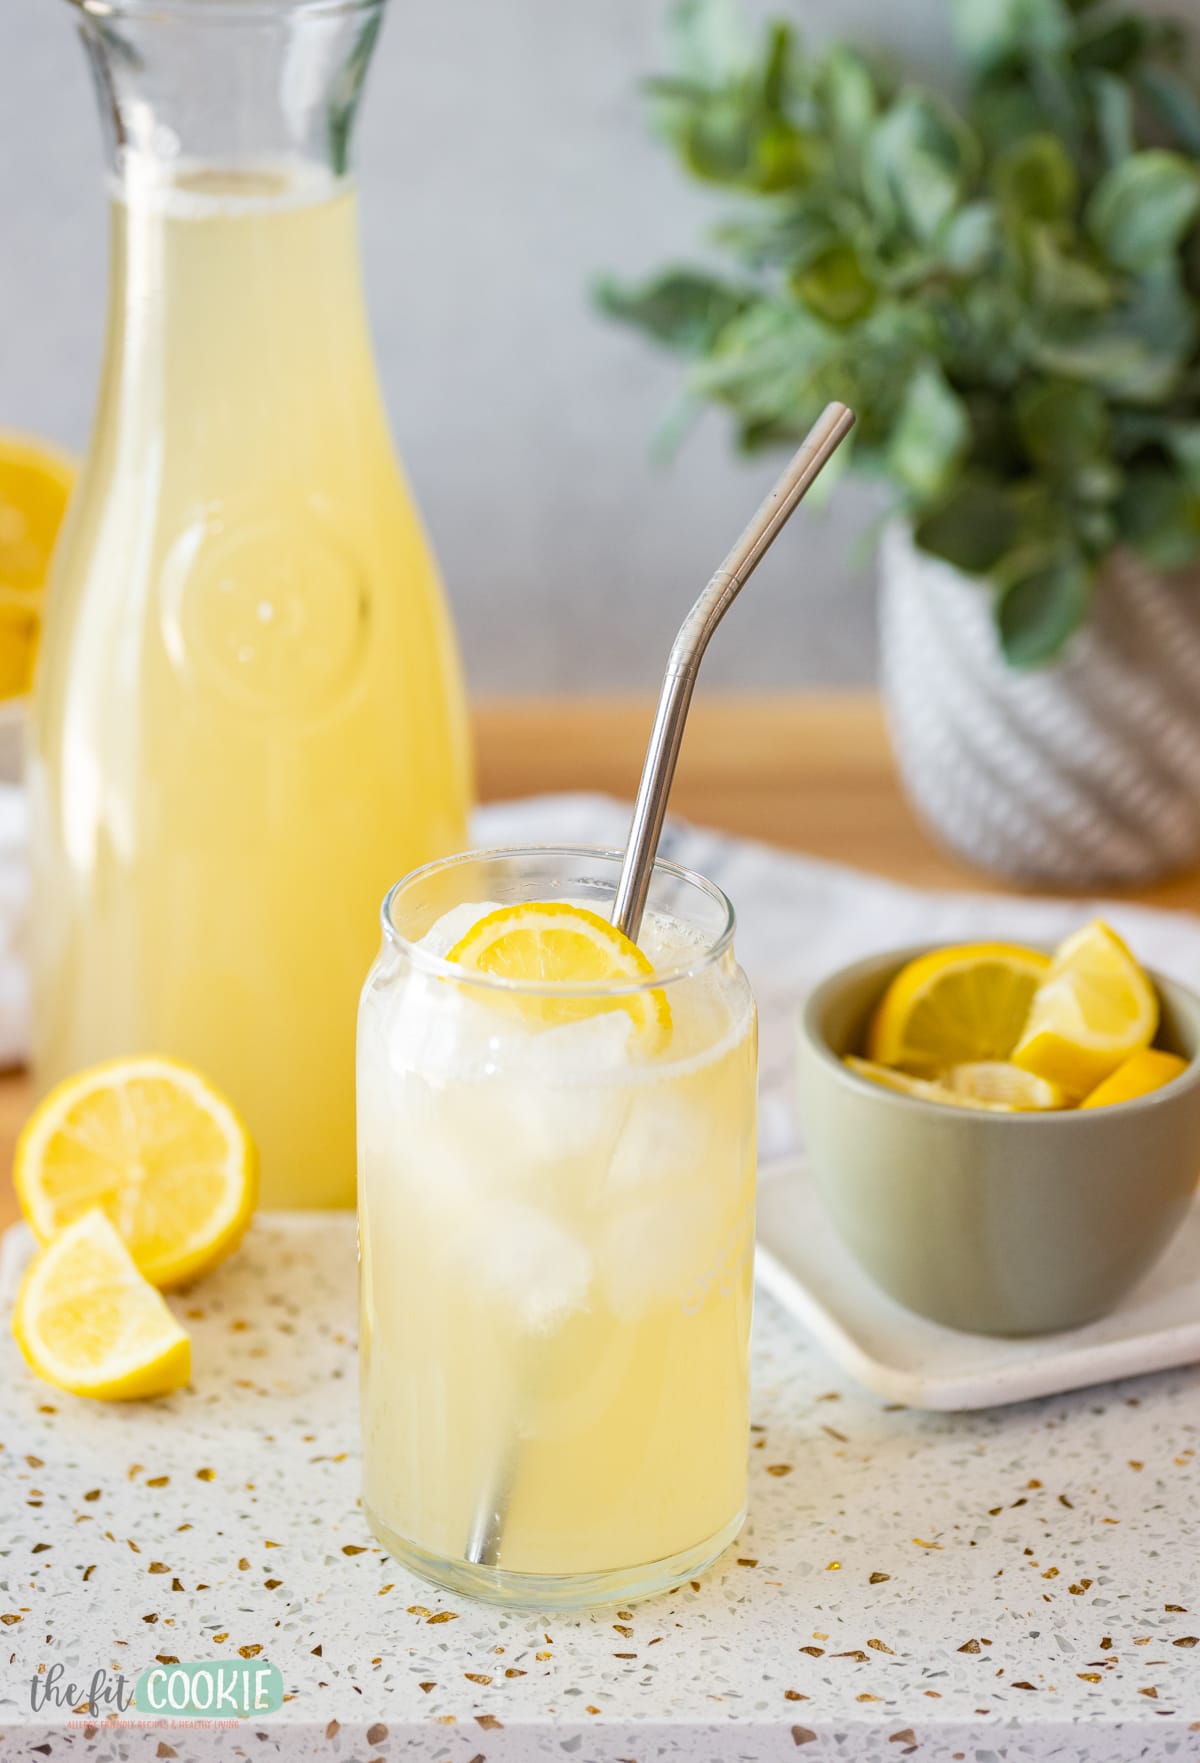 Soursop lemonade served in a glass with lemon slices.